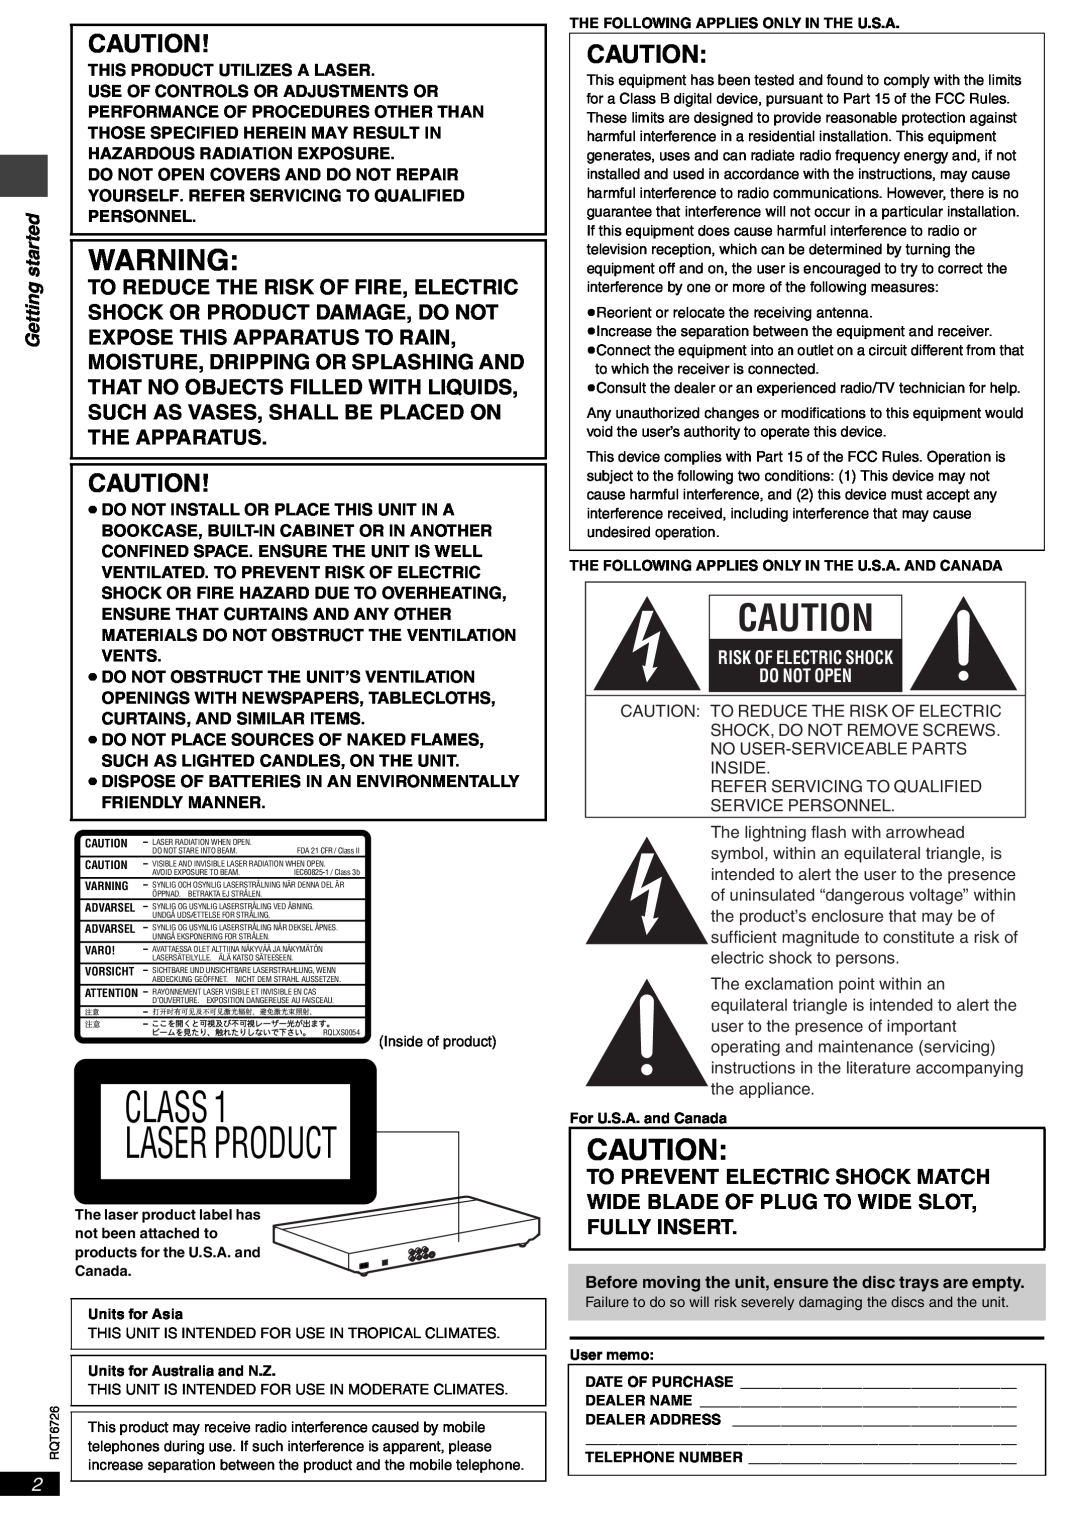 Panasonic DVD-F61 To Reduce The Risk Of Fire, Electric, Expose This Apparatus To Rain, Shock Or Product Damage, Do Not 